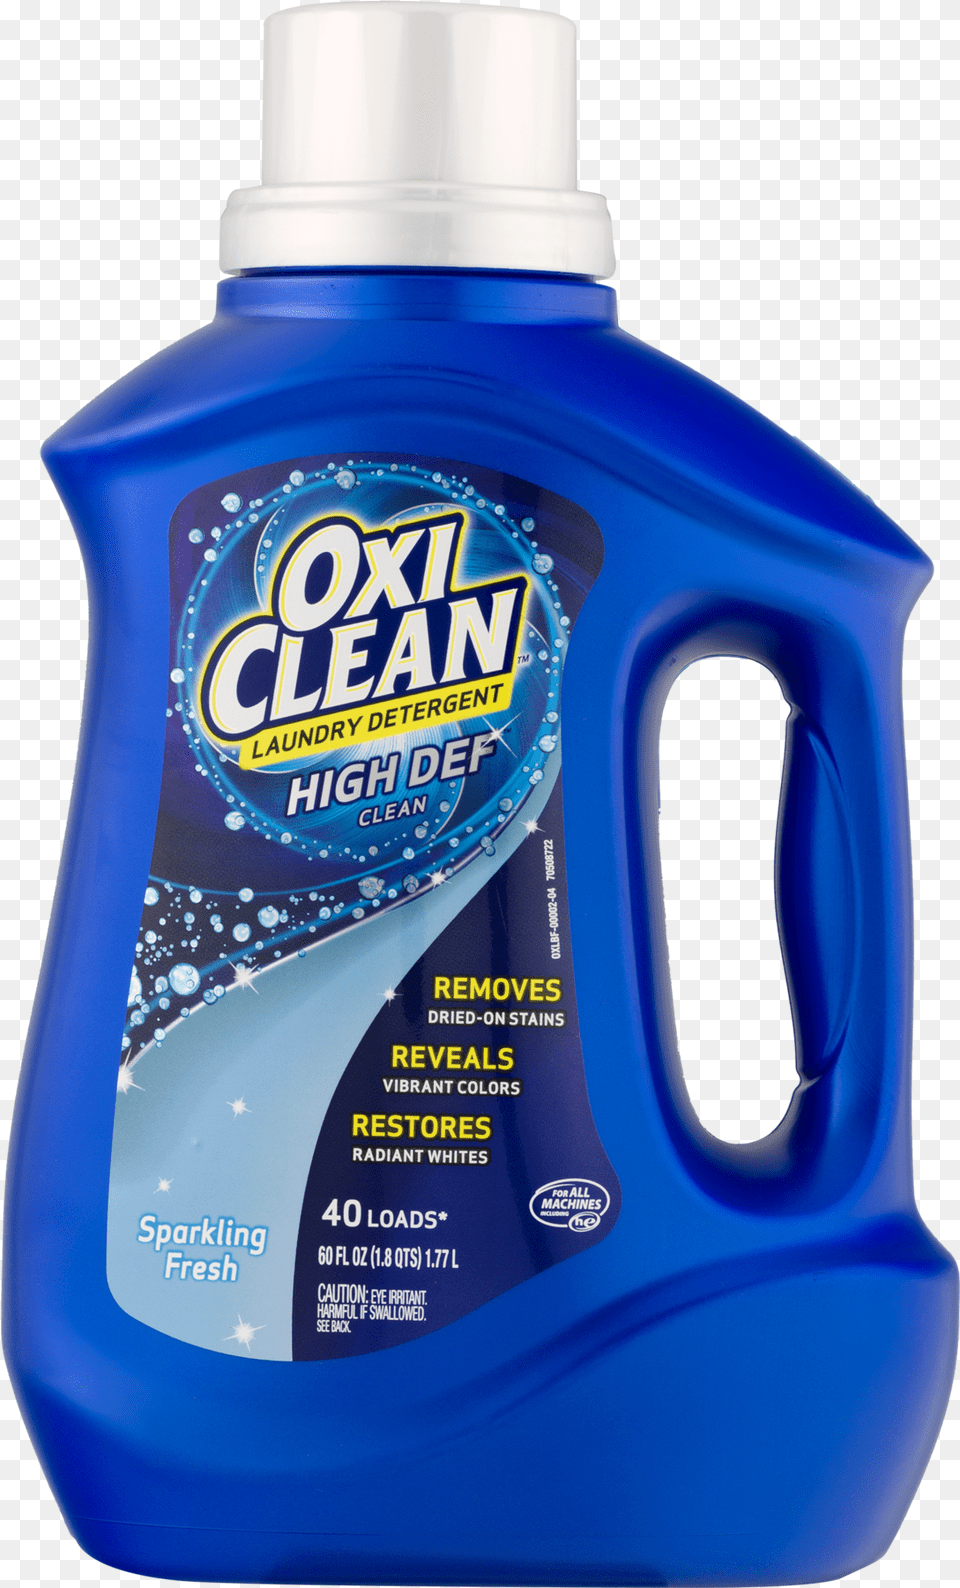 Oxiclean Laundry Detergent, Bottle, Shaker Png